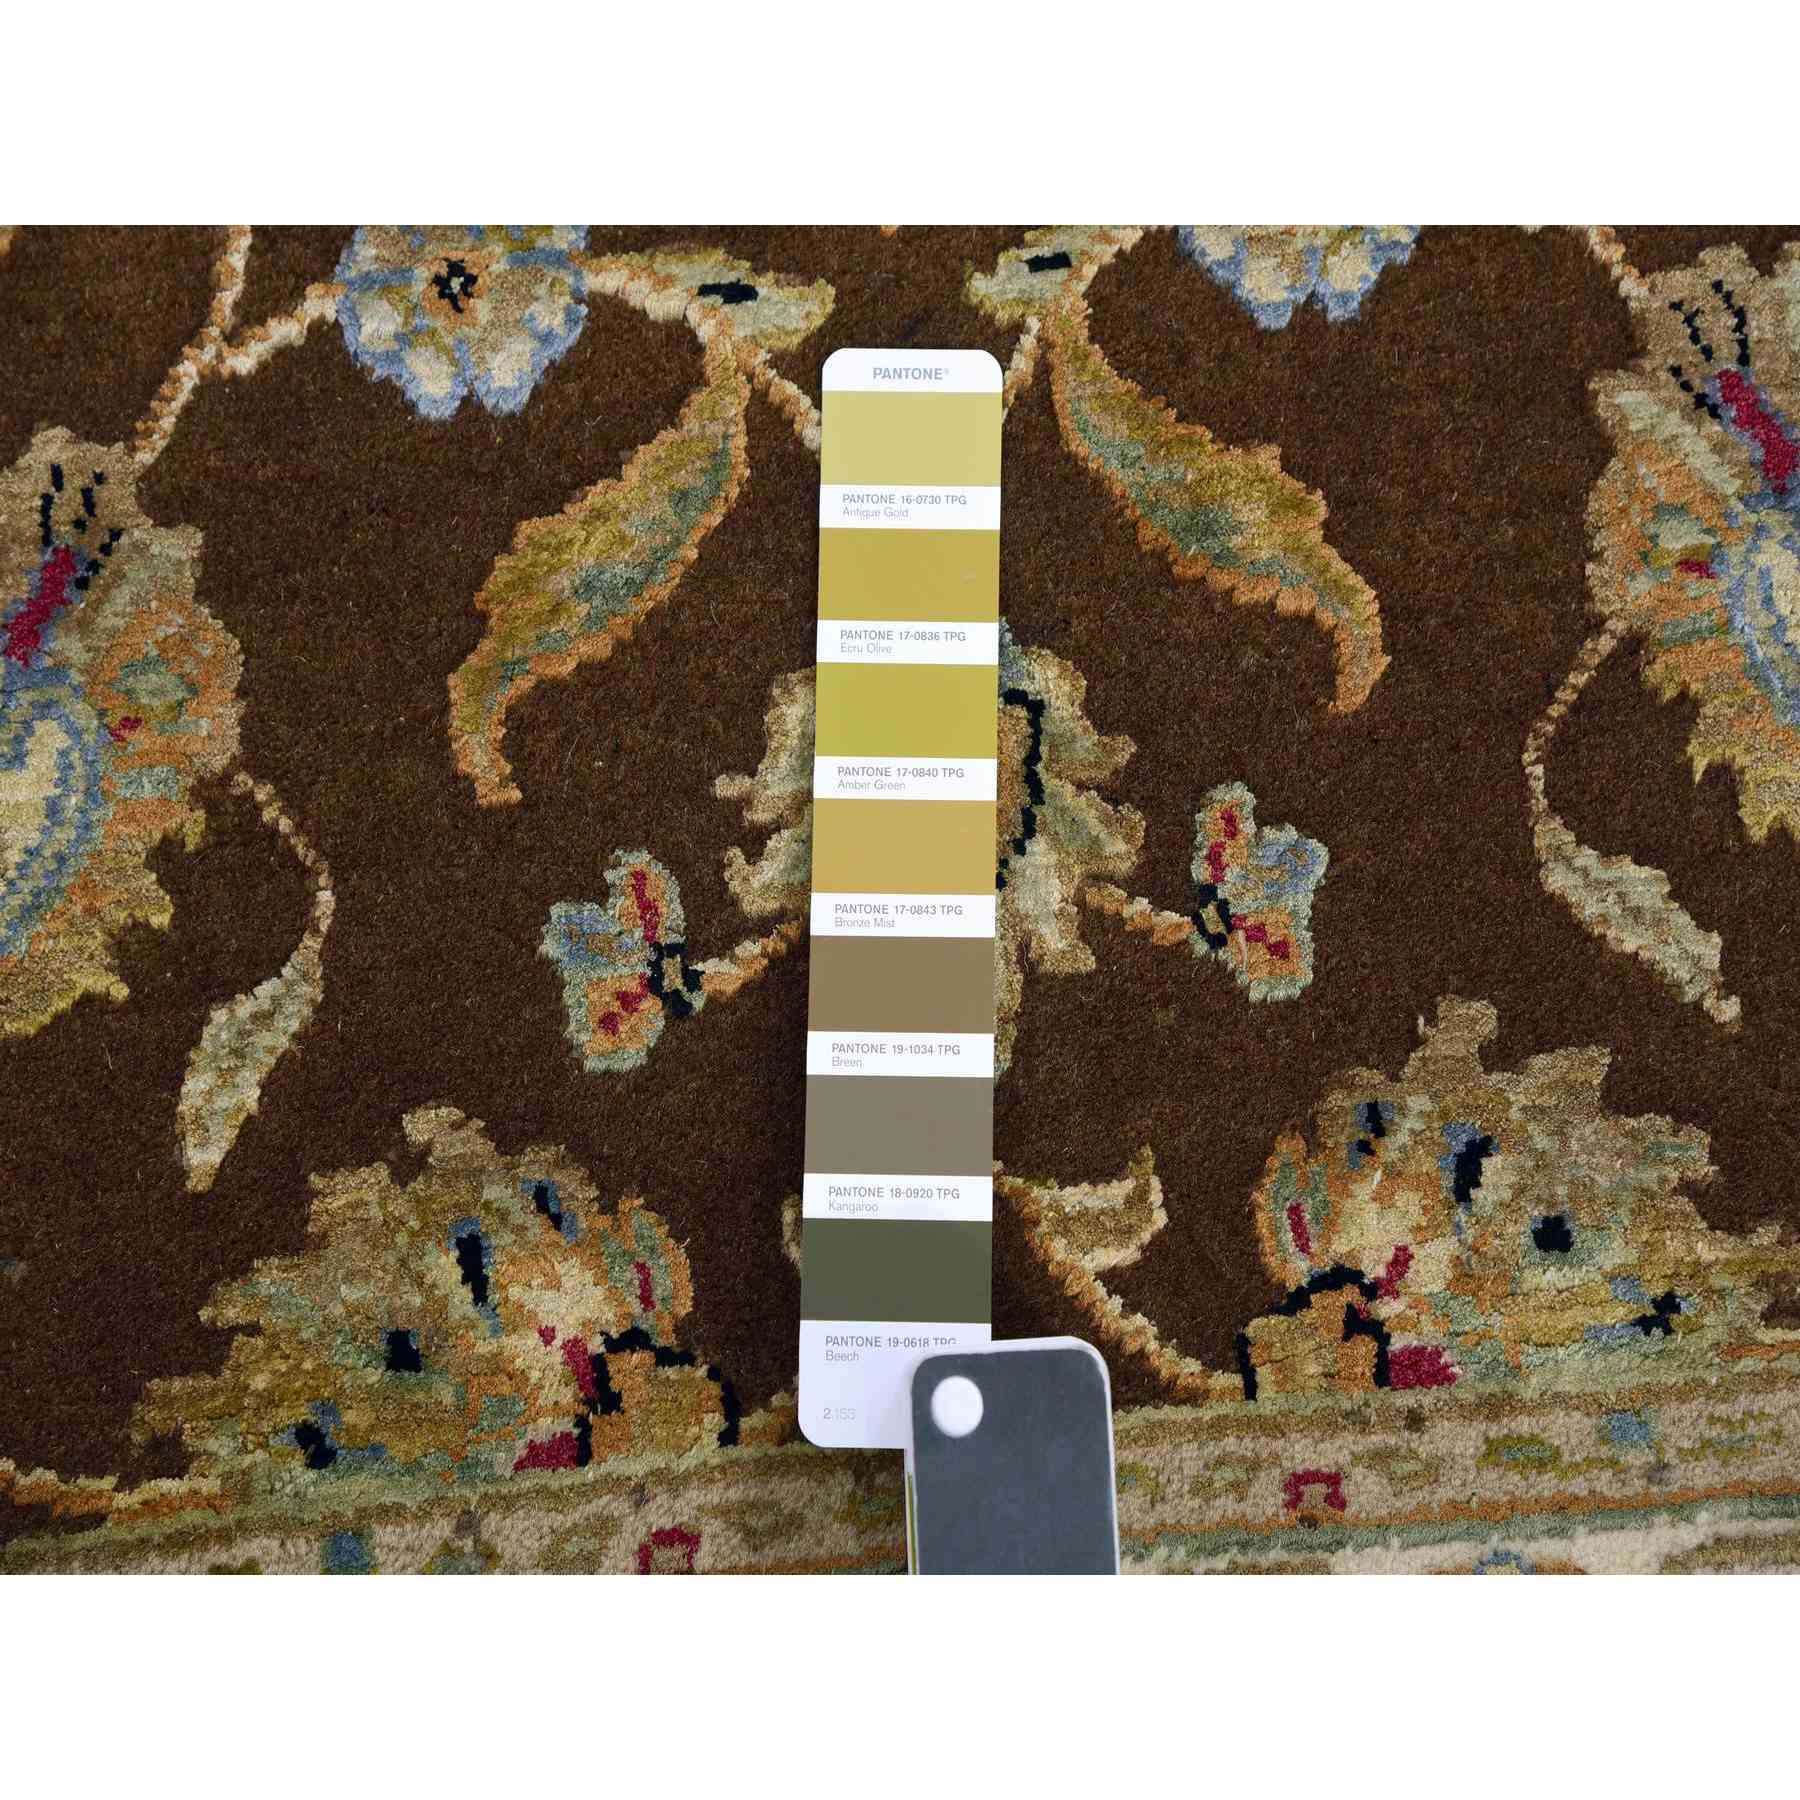 Rajasthan-Hand-Knotted-Rug-377000